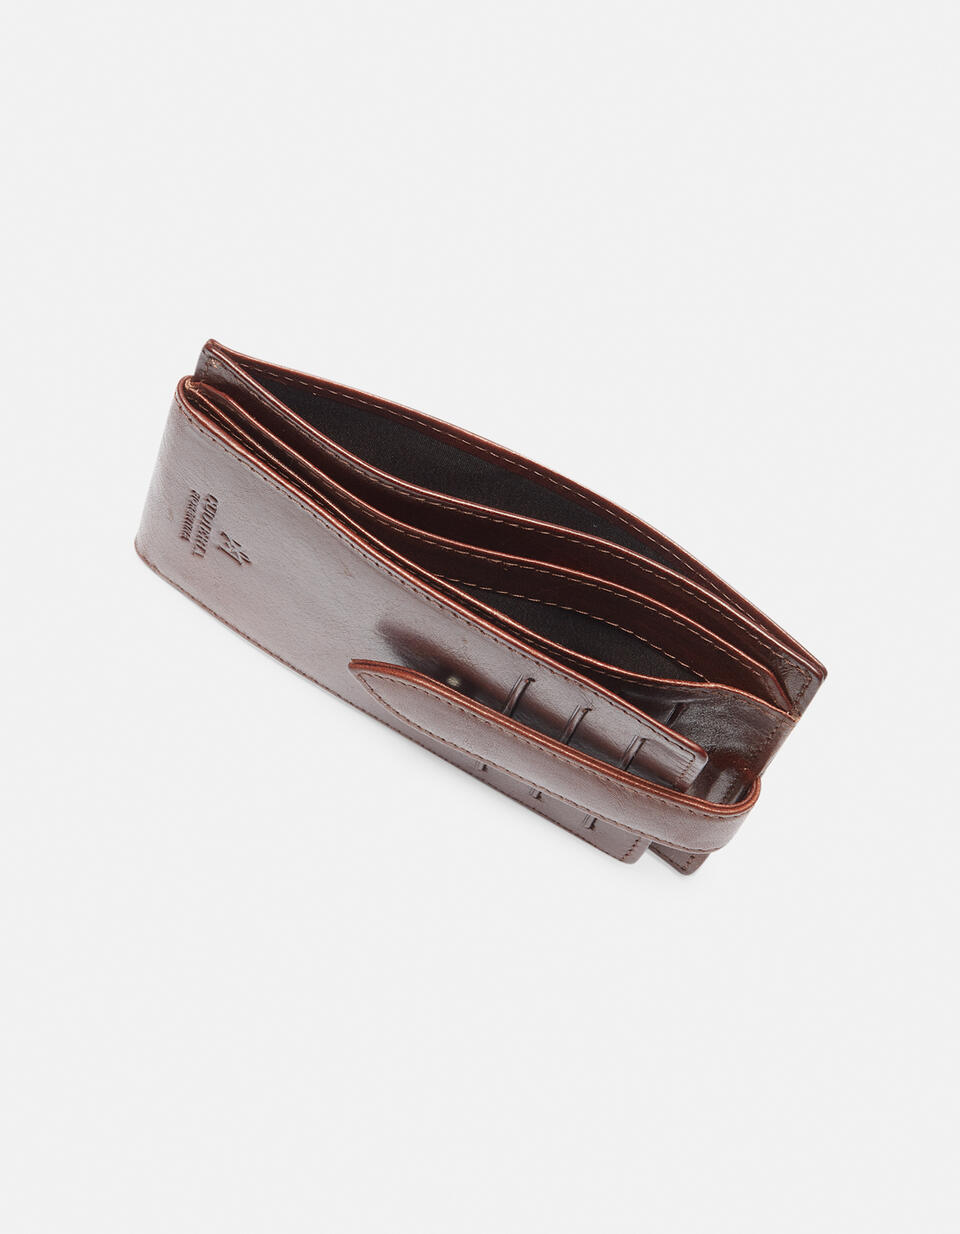 Warm and Color Anti-RFID cardholder - Women's Wallets - Men's Wallets | Wallets MARRONE - Women's Wallets - Men's Wallets | WalletsCuoieria Fiorentina